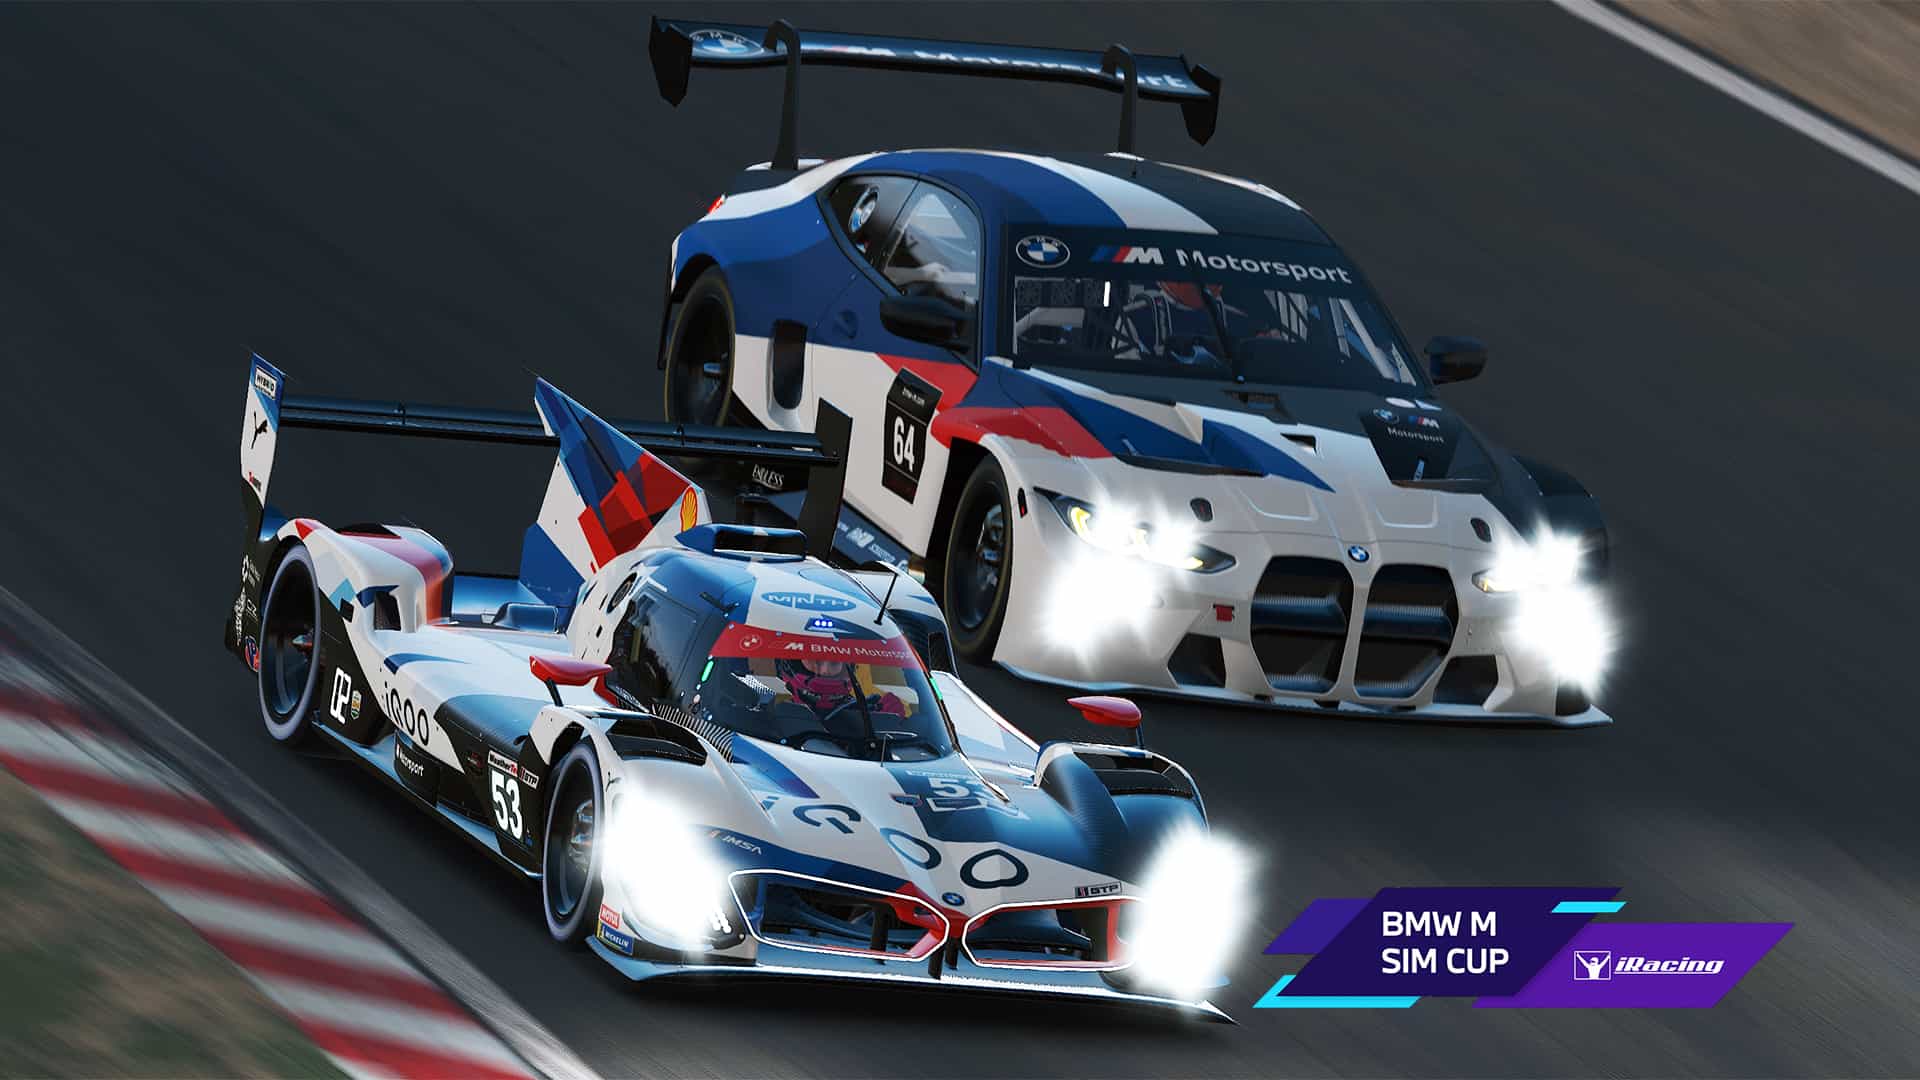 BMW M SIM Cup returns on iRacing in 2023 with more than $45,000 up for grabs